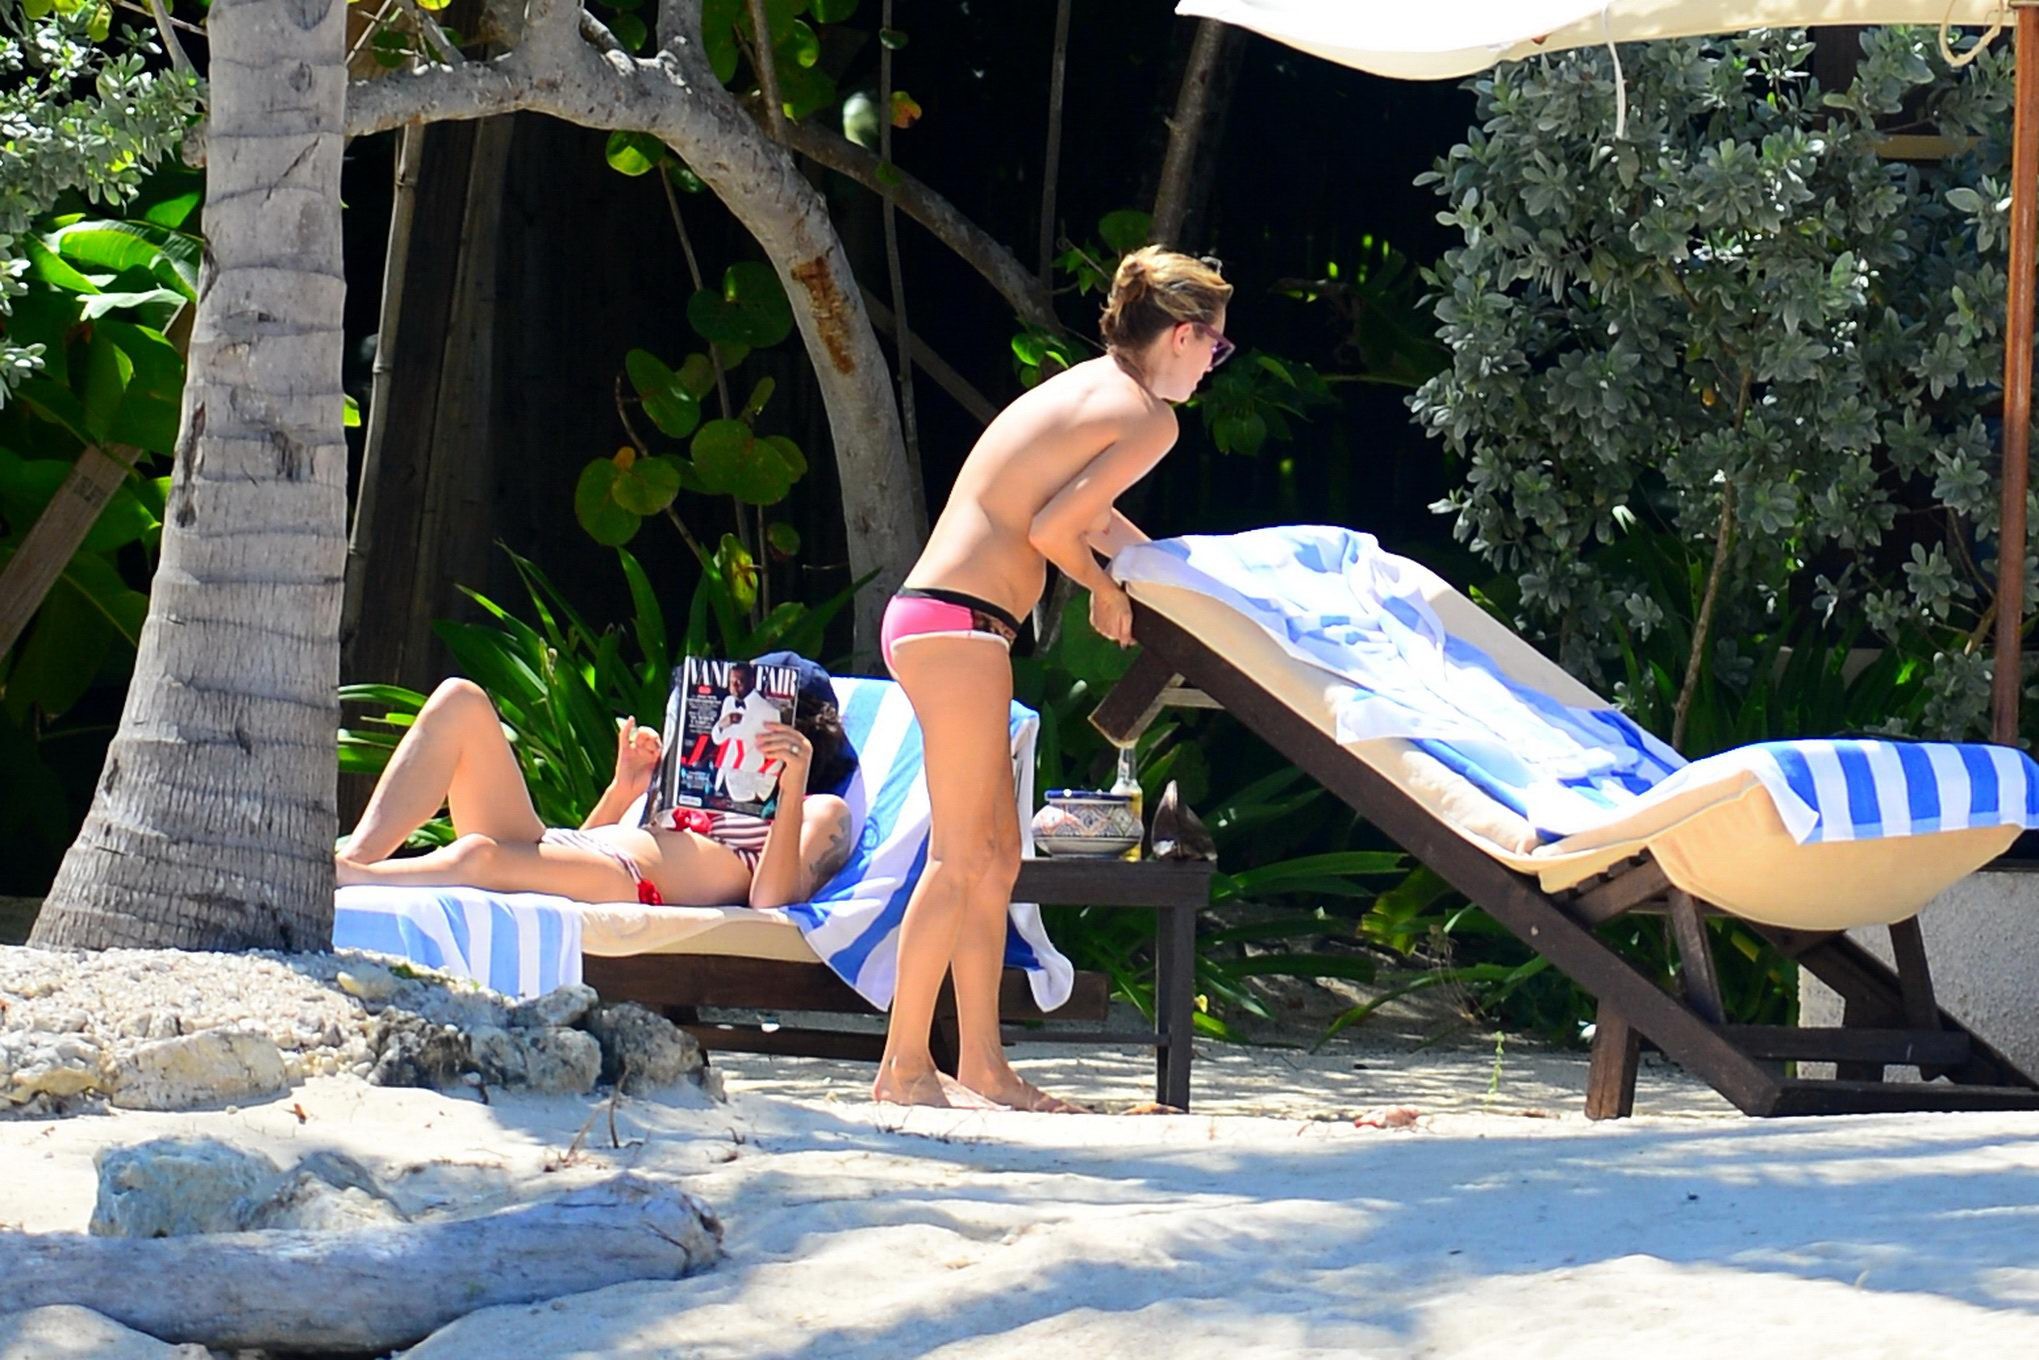 Kate Moss tanning topless on a beach in Jamaica #75215450